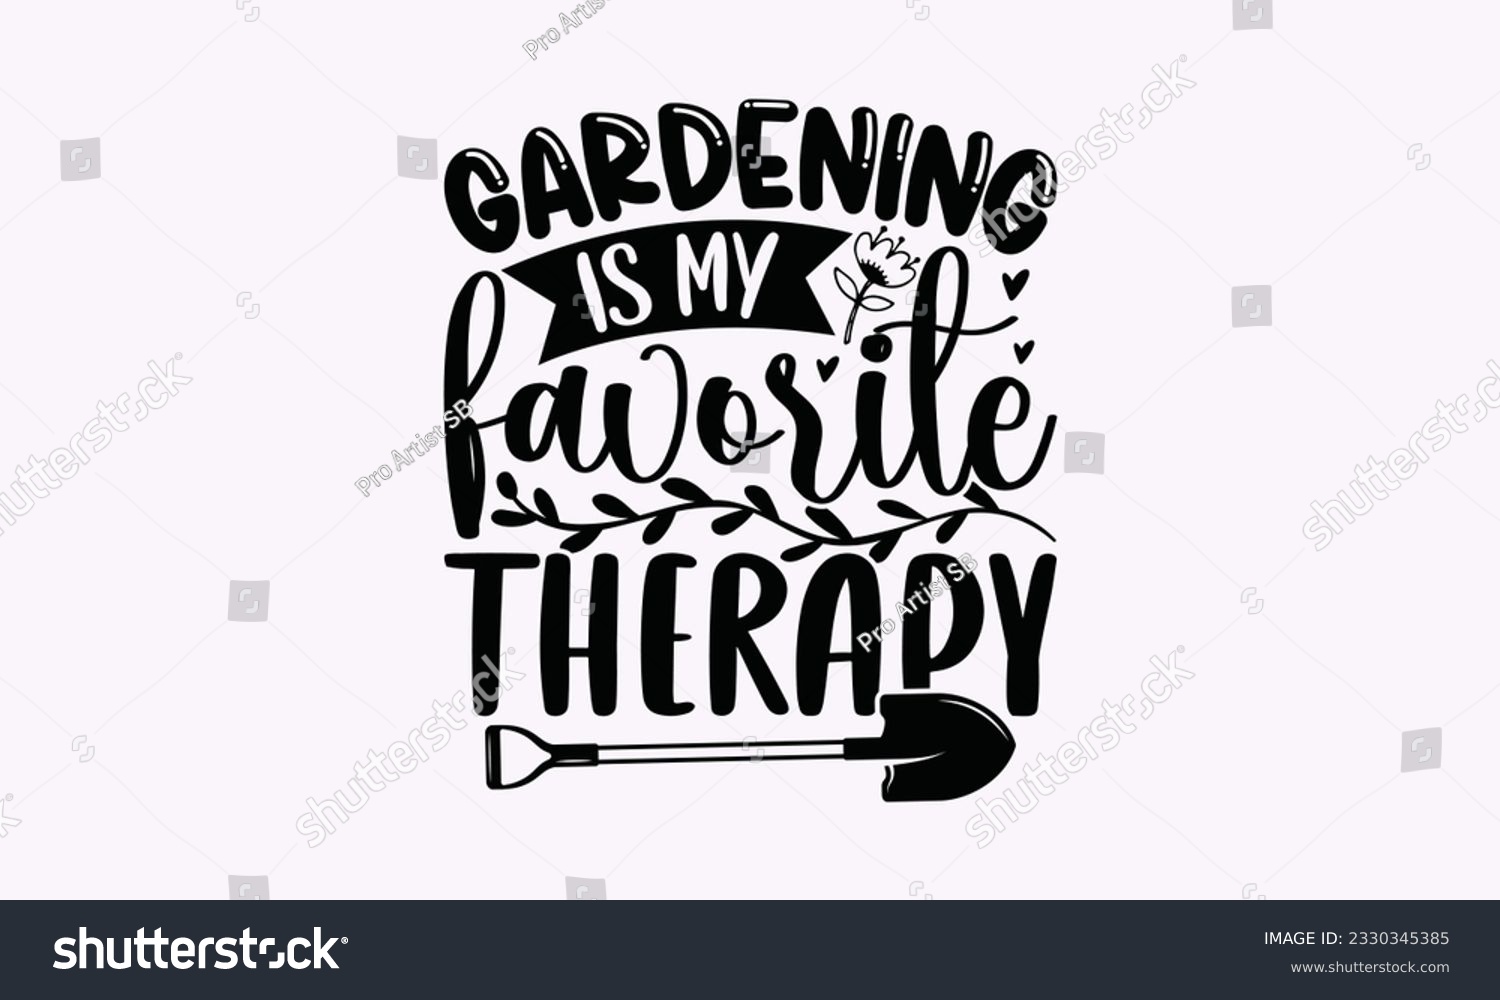 SVG of Gardening is my favorite therapy - Gardening SVG Design, plant Quotes, Hand drawn lettering phrase, Isolated on white background. svg